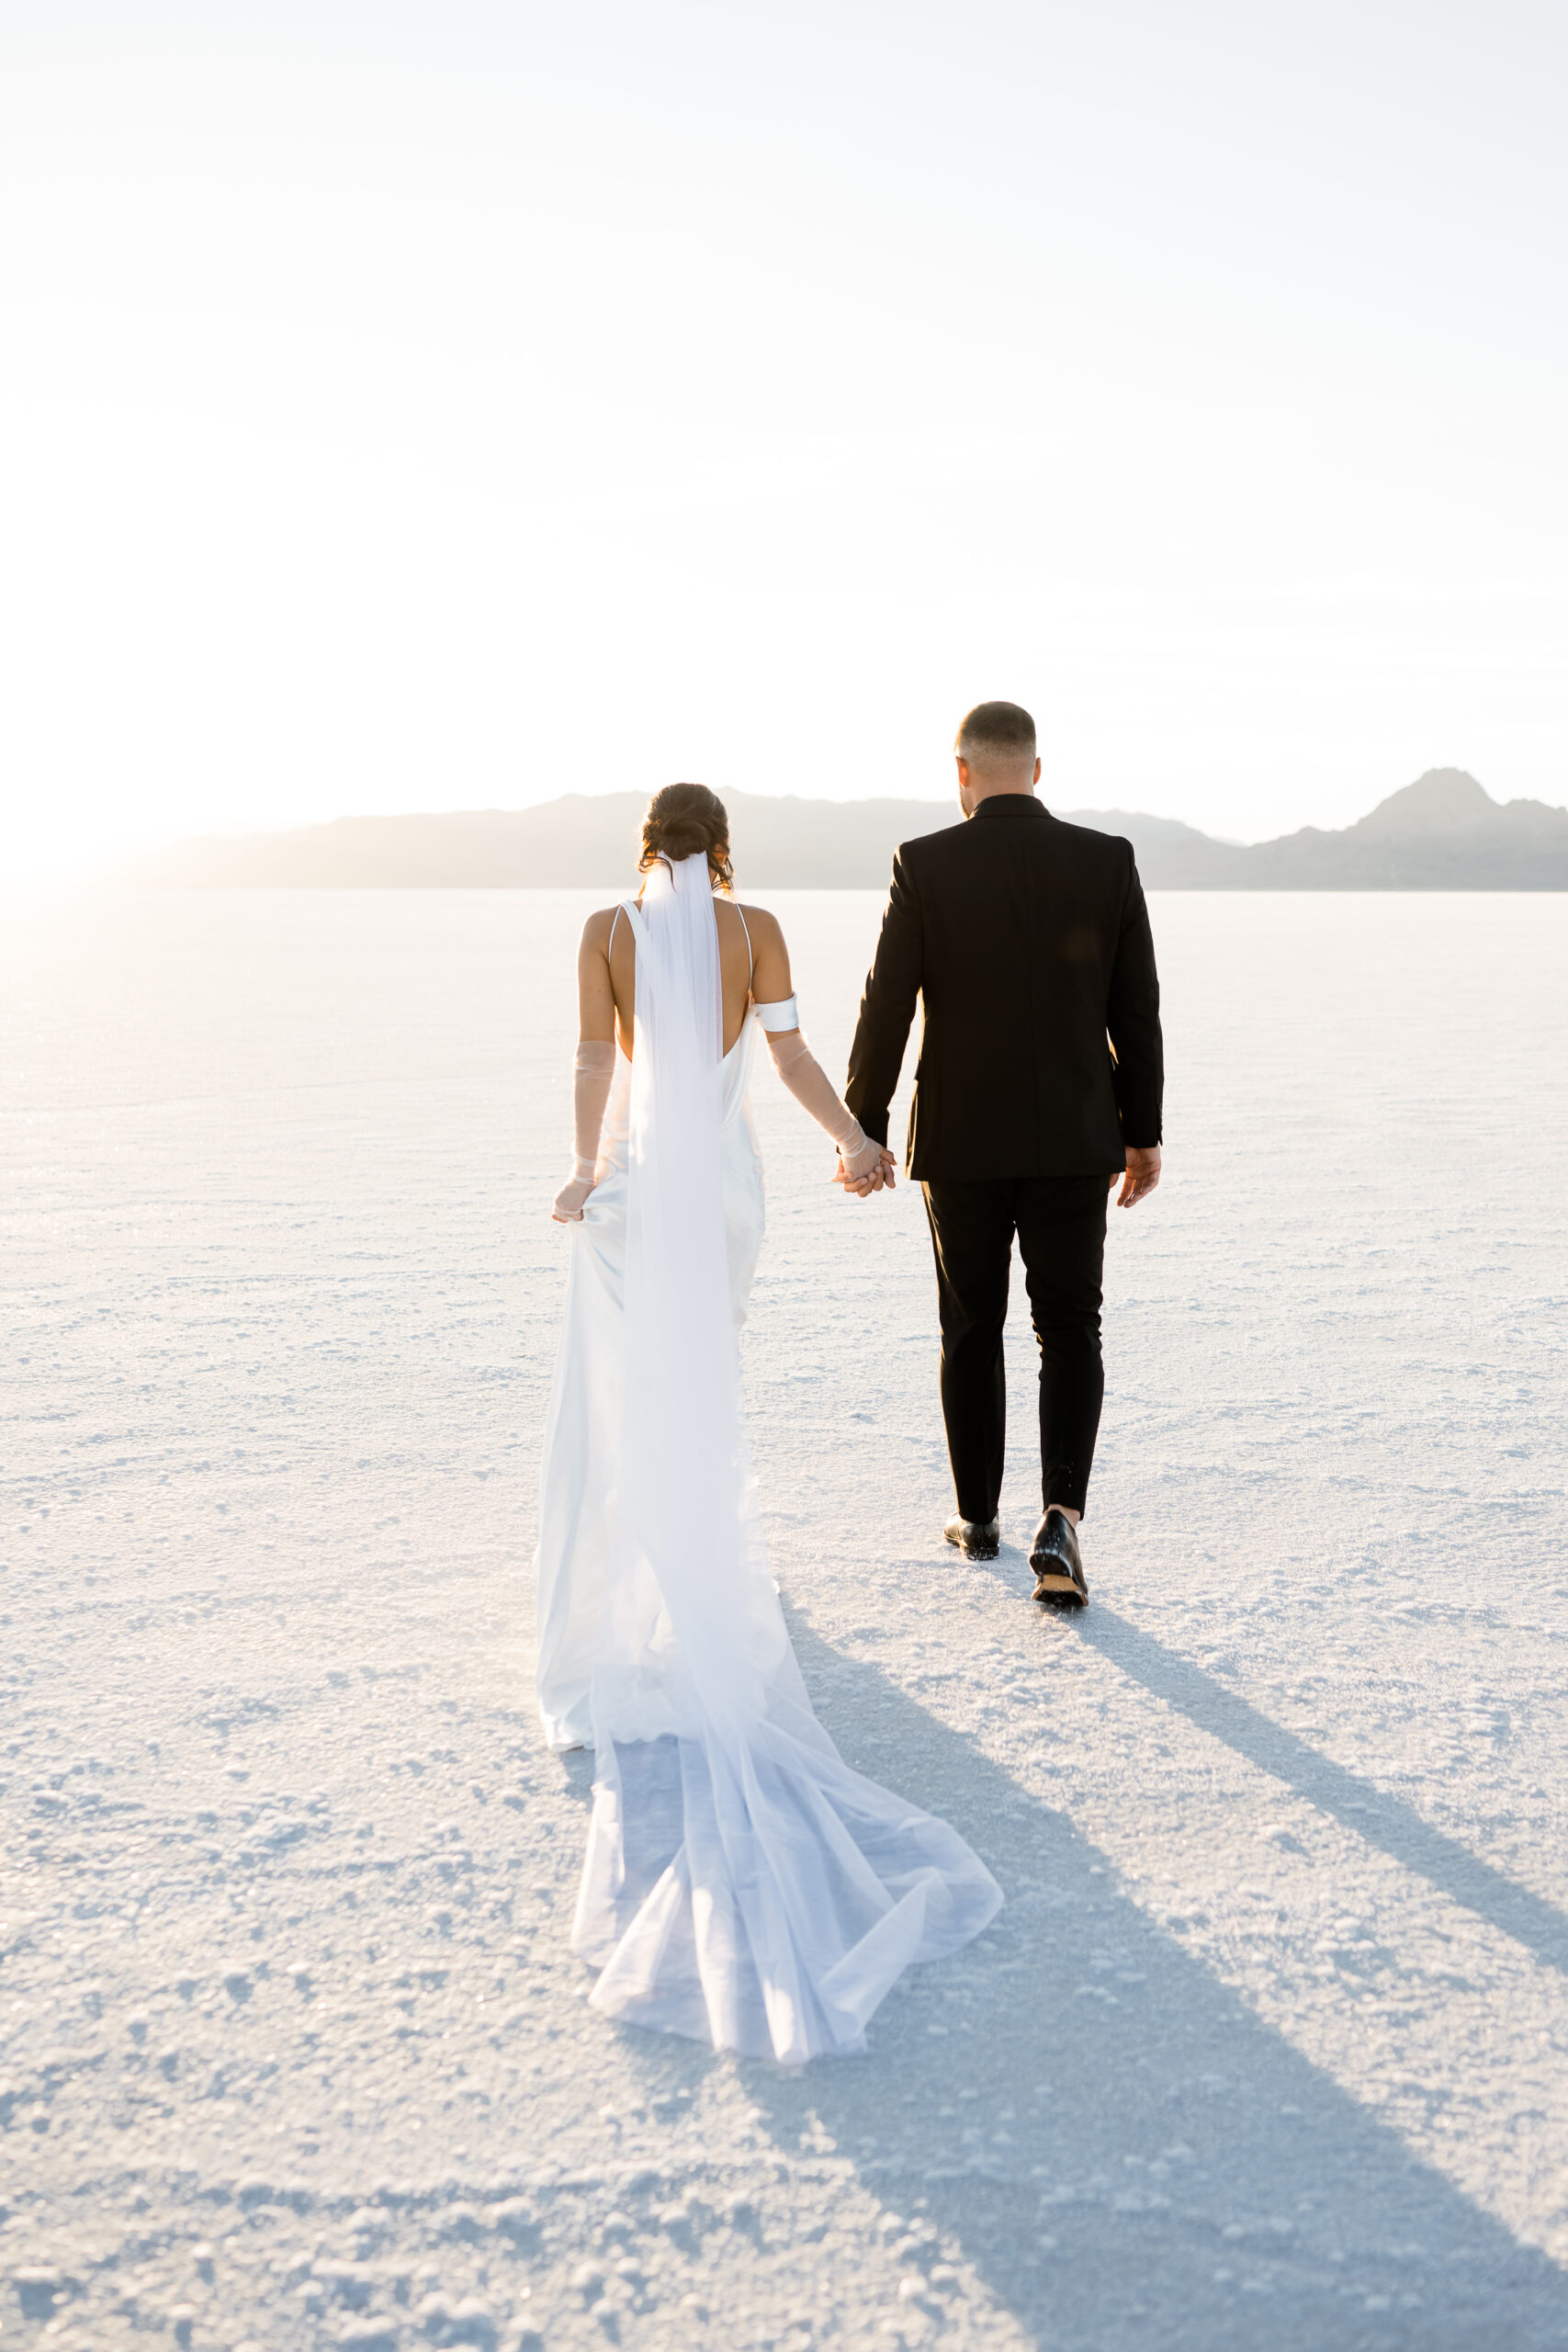 Wide shot of vast Bonneville Salt Flats with married couple in wedding attire holding hands walking into the suset in utah